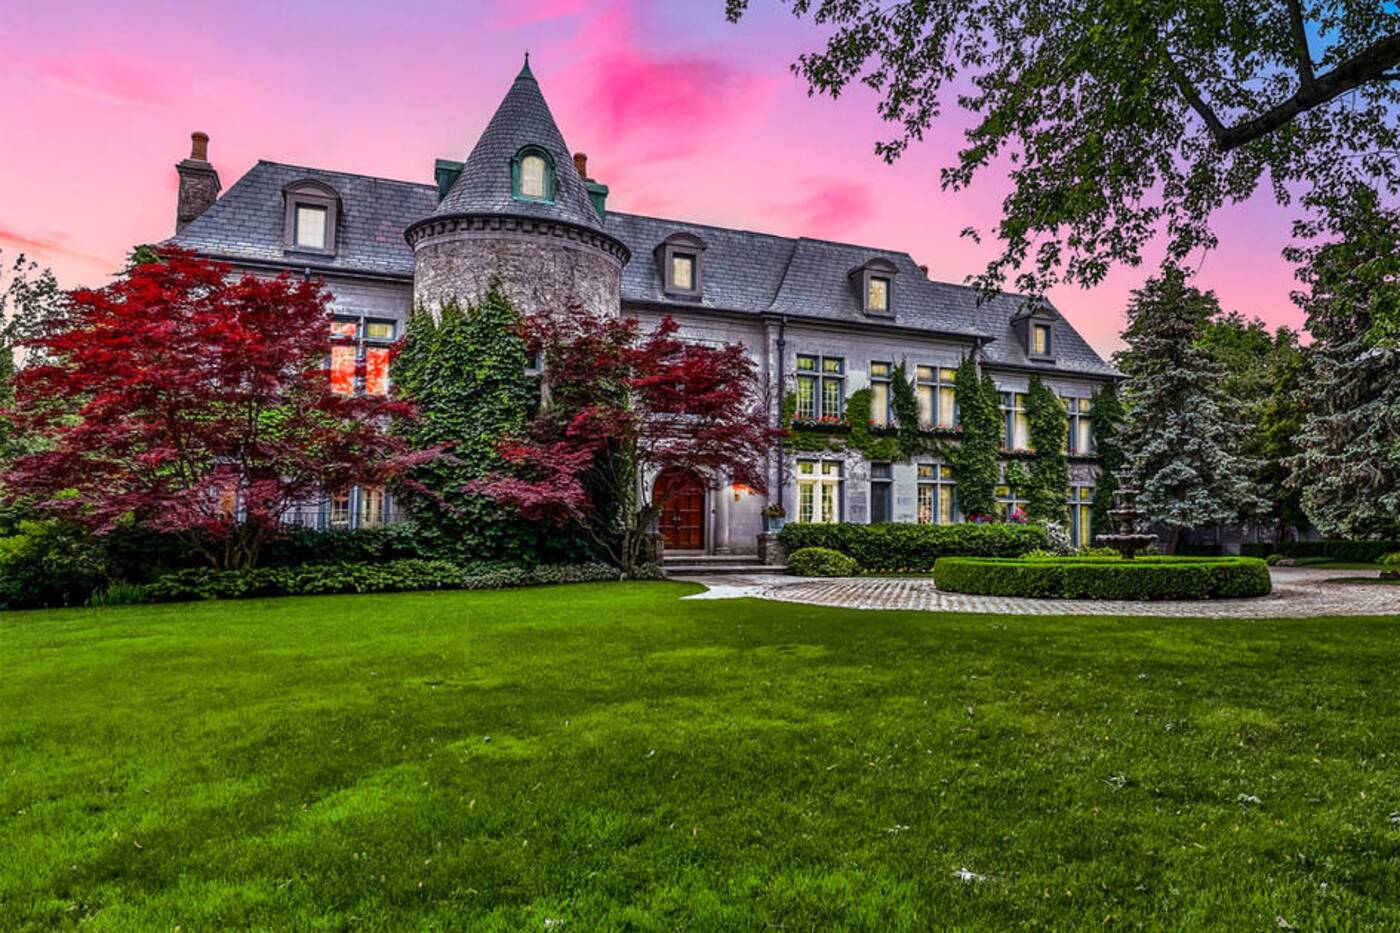 The 10 most  expensive  homes  for sale in Toronto  right now